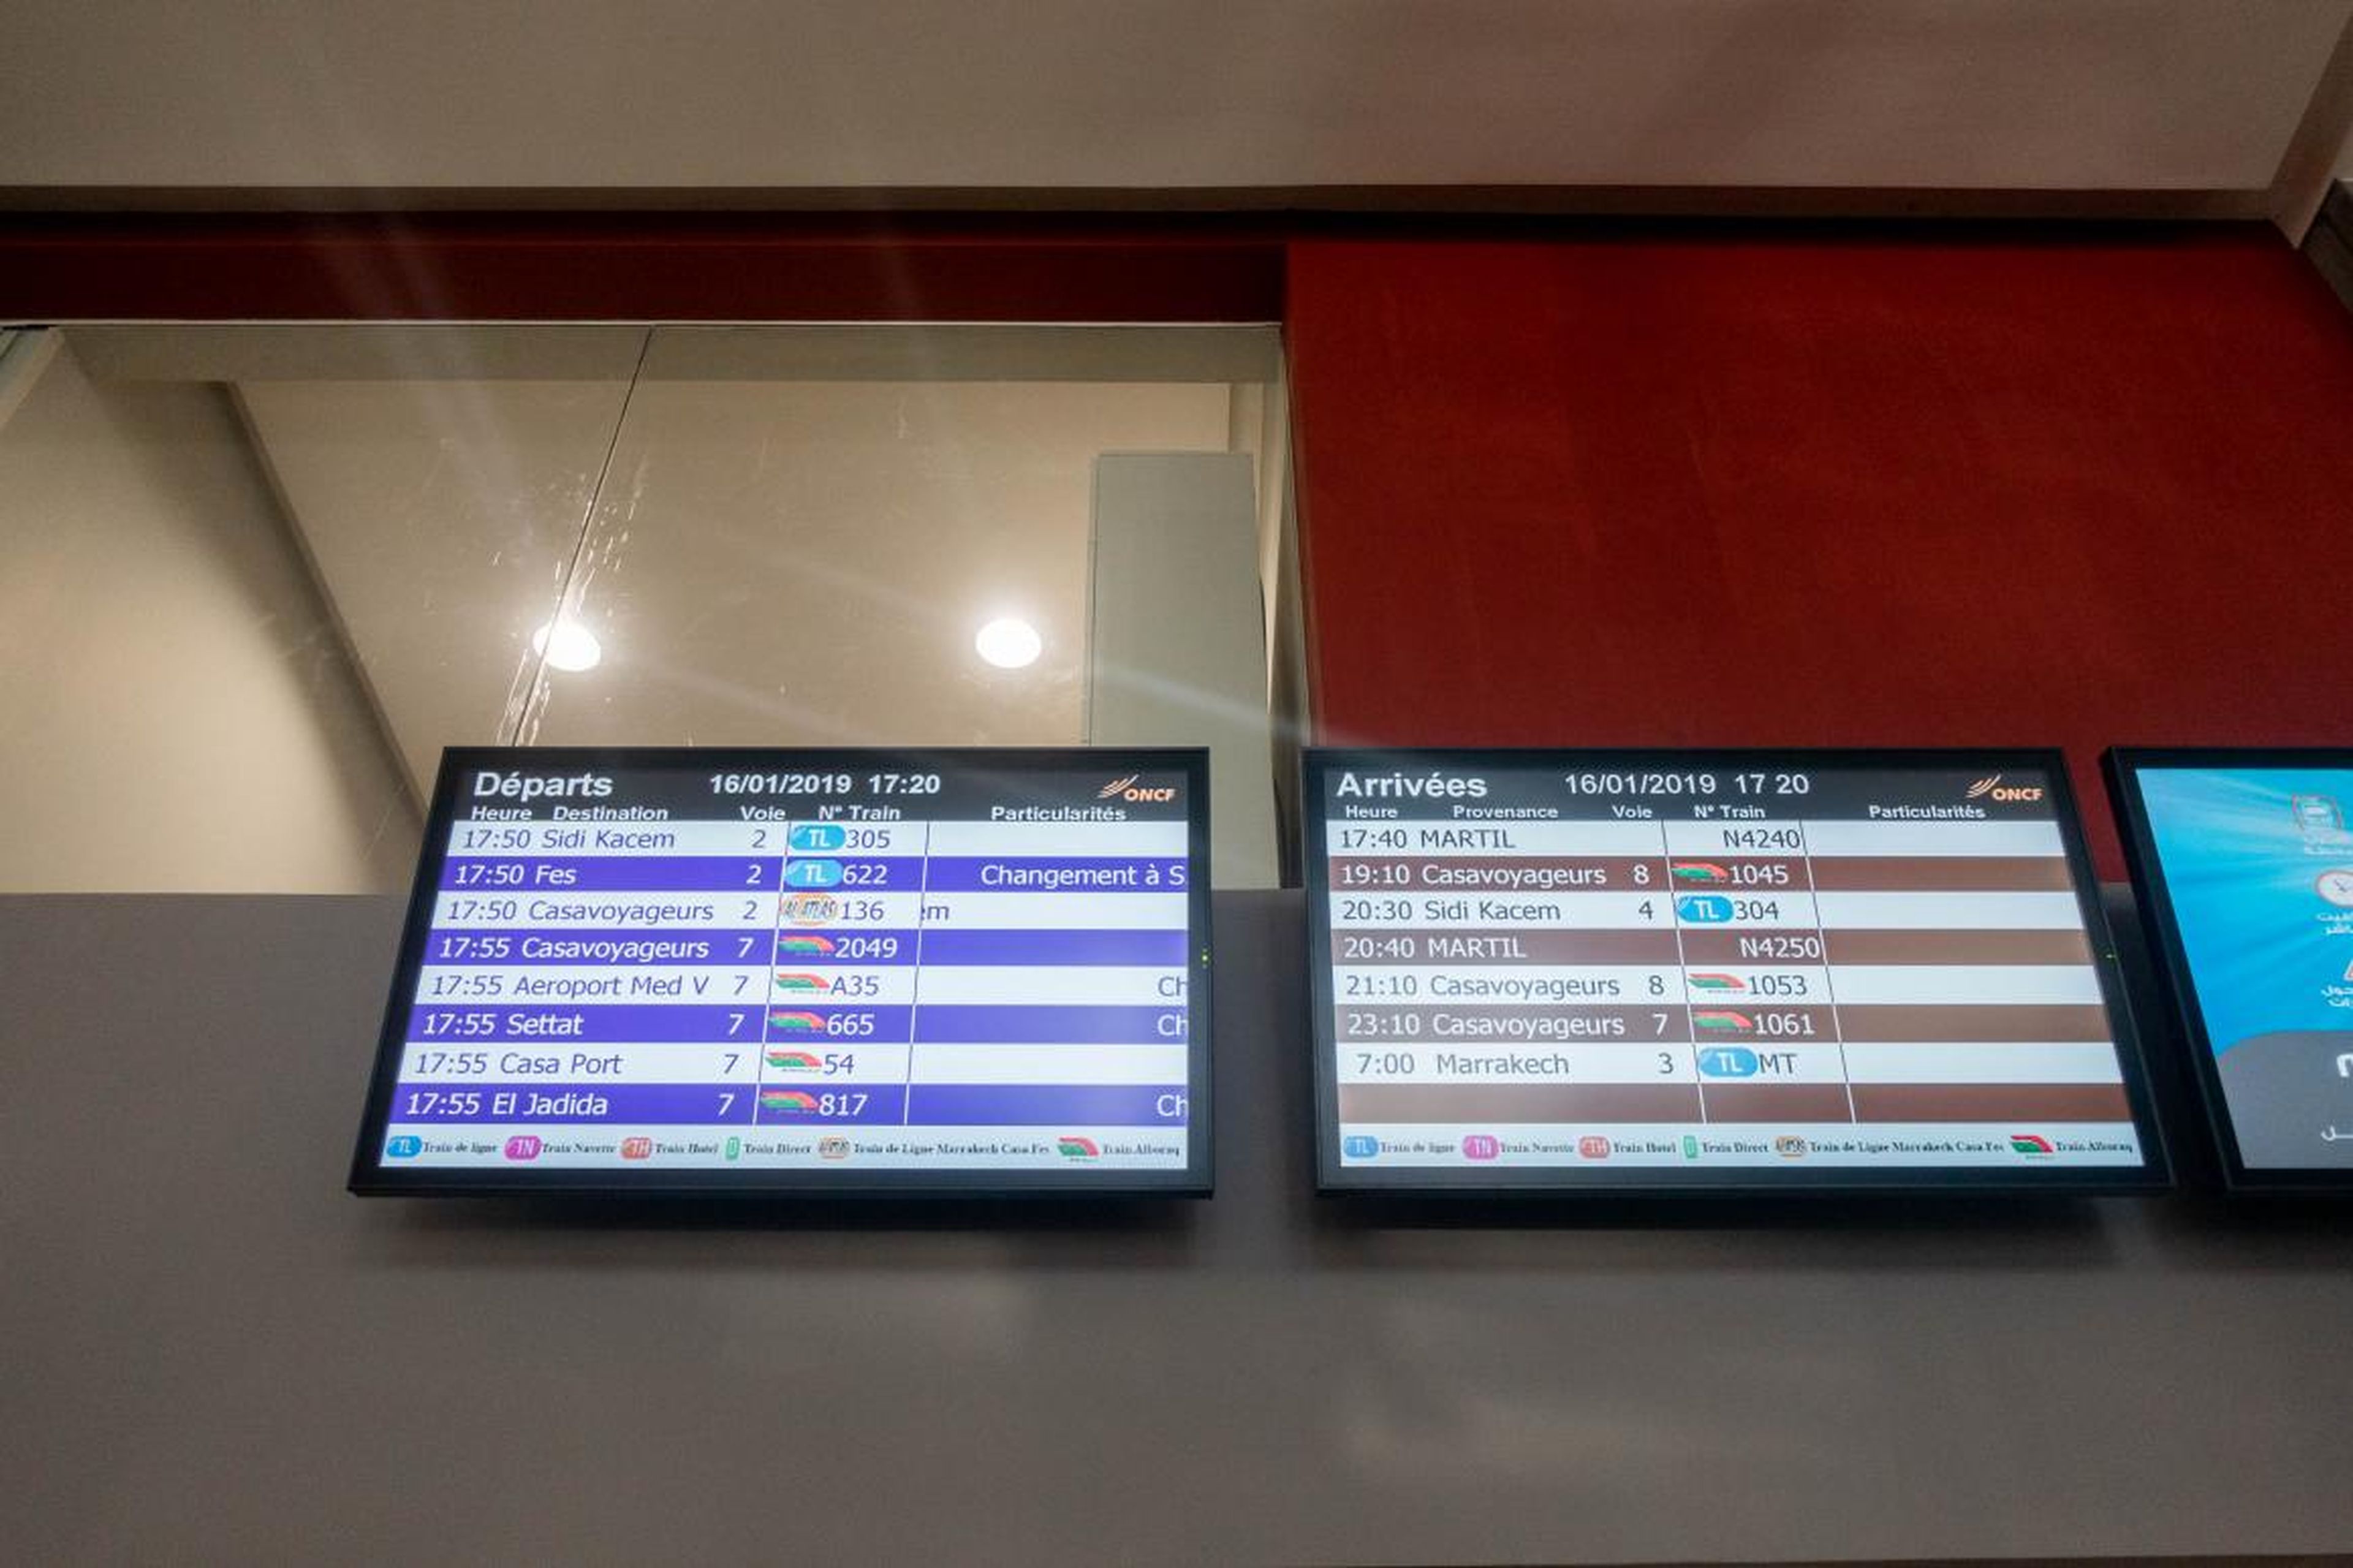 A helpful sign tells you all the train times for both regular and high-speed trains.